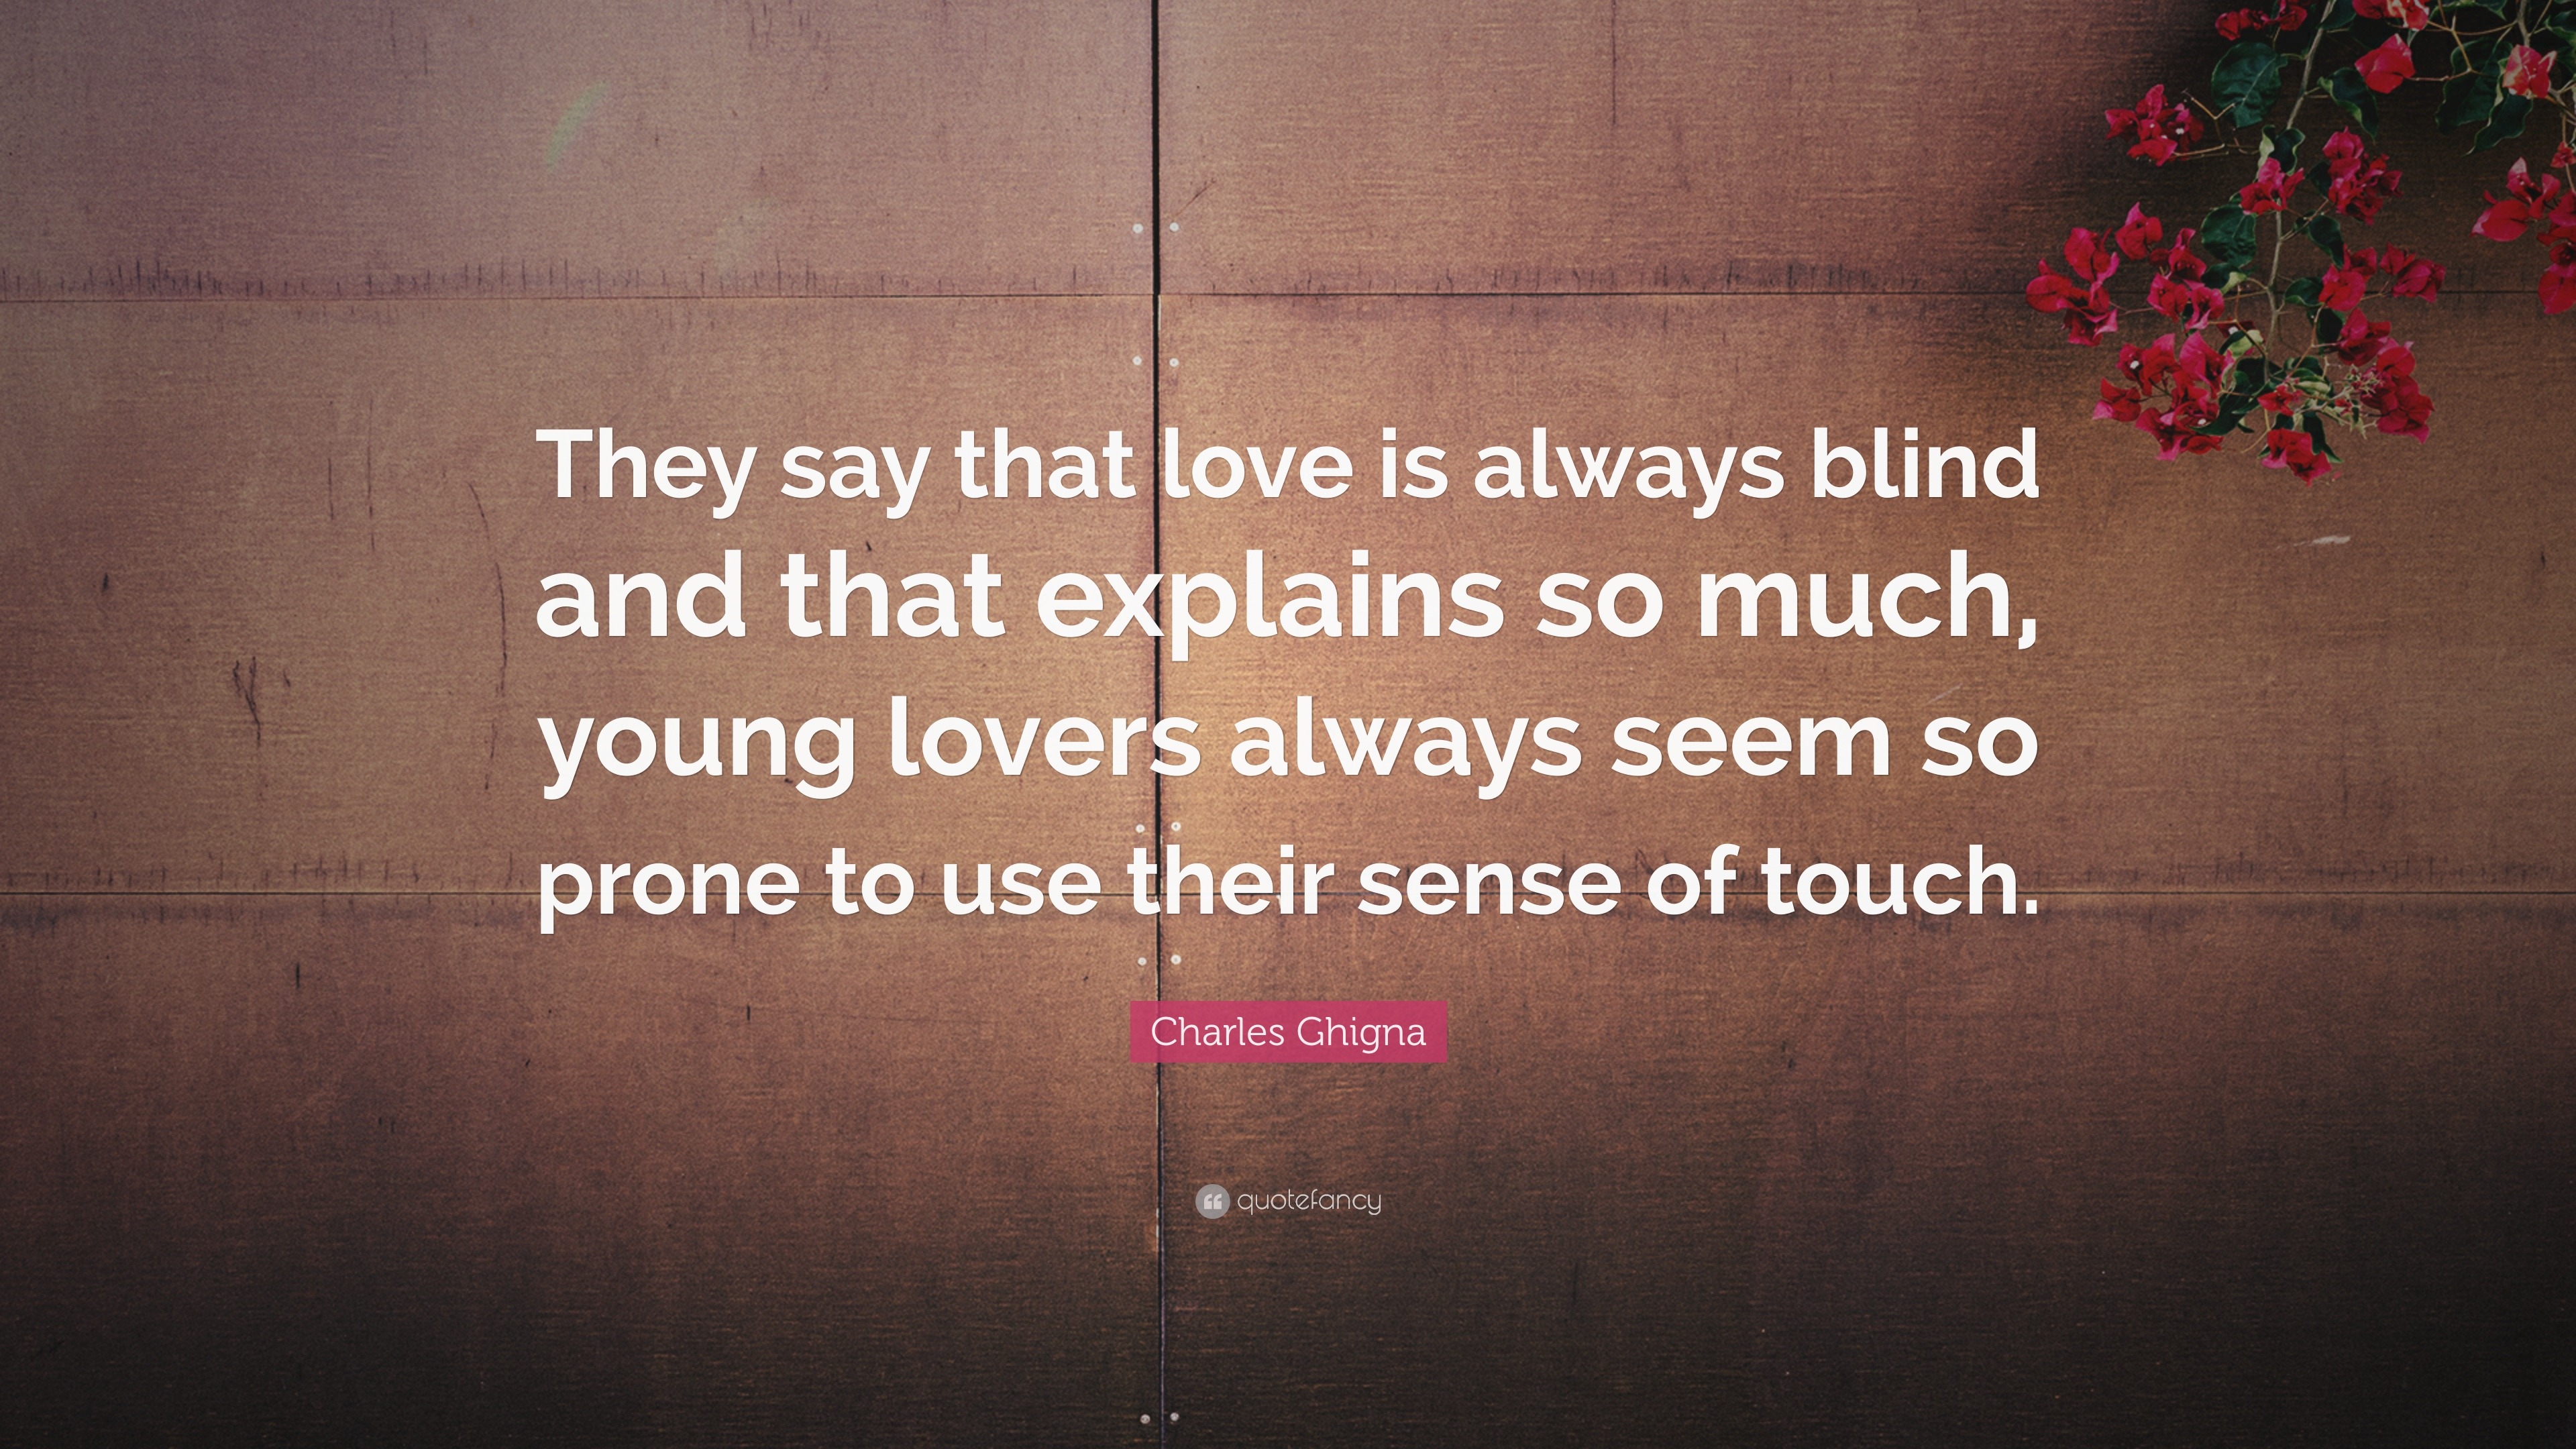 Charles Ghigna Quote “They say that love is always blind and that explains so